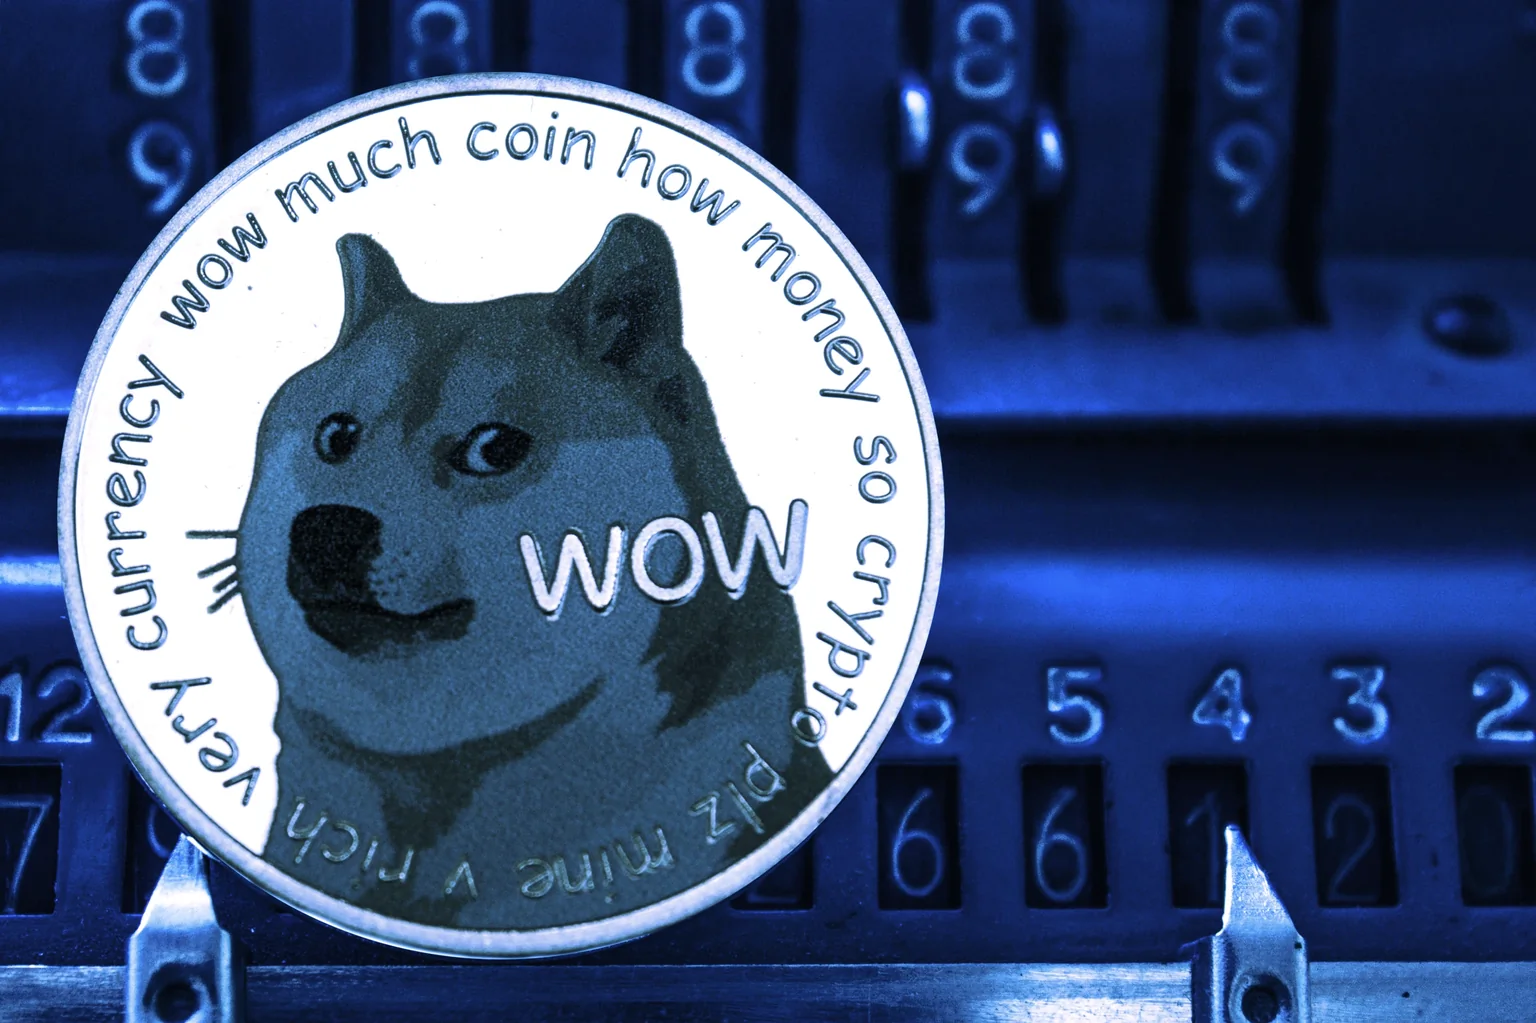 Dogecoin: so much wow Image: Shutterstock